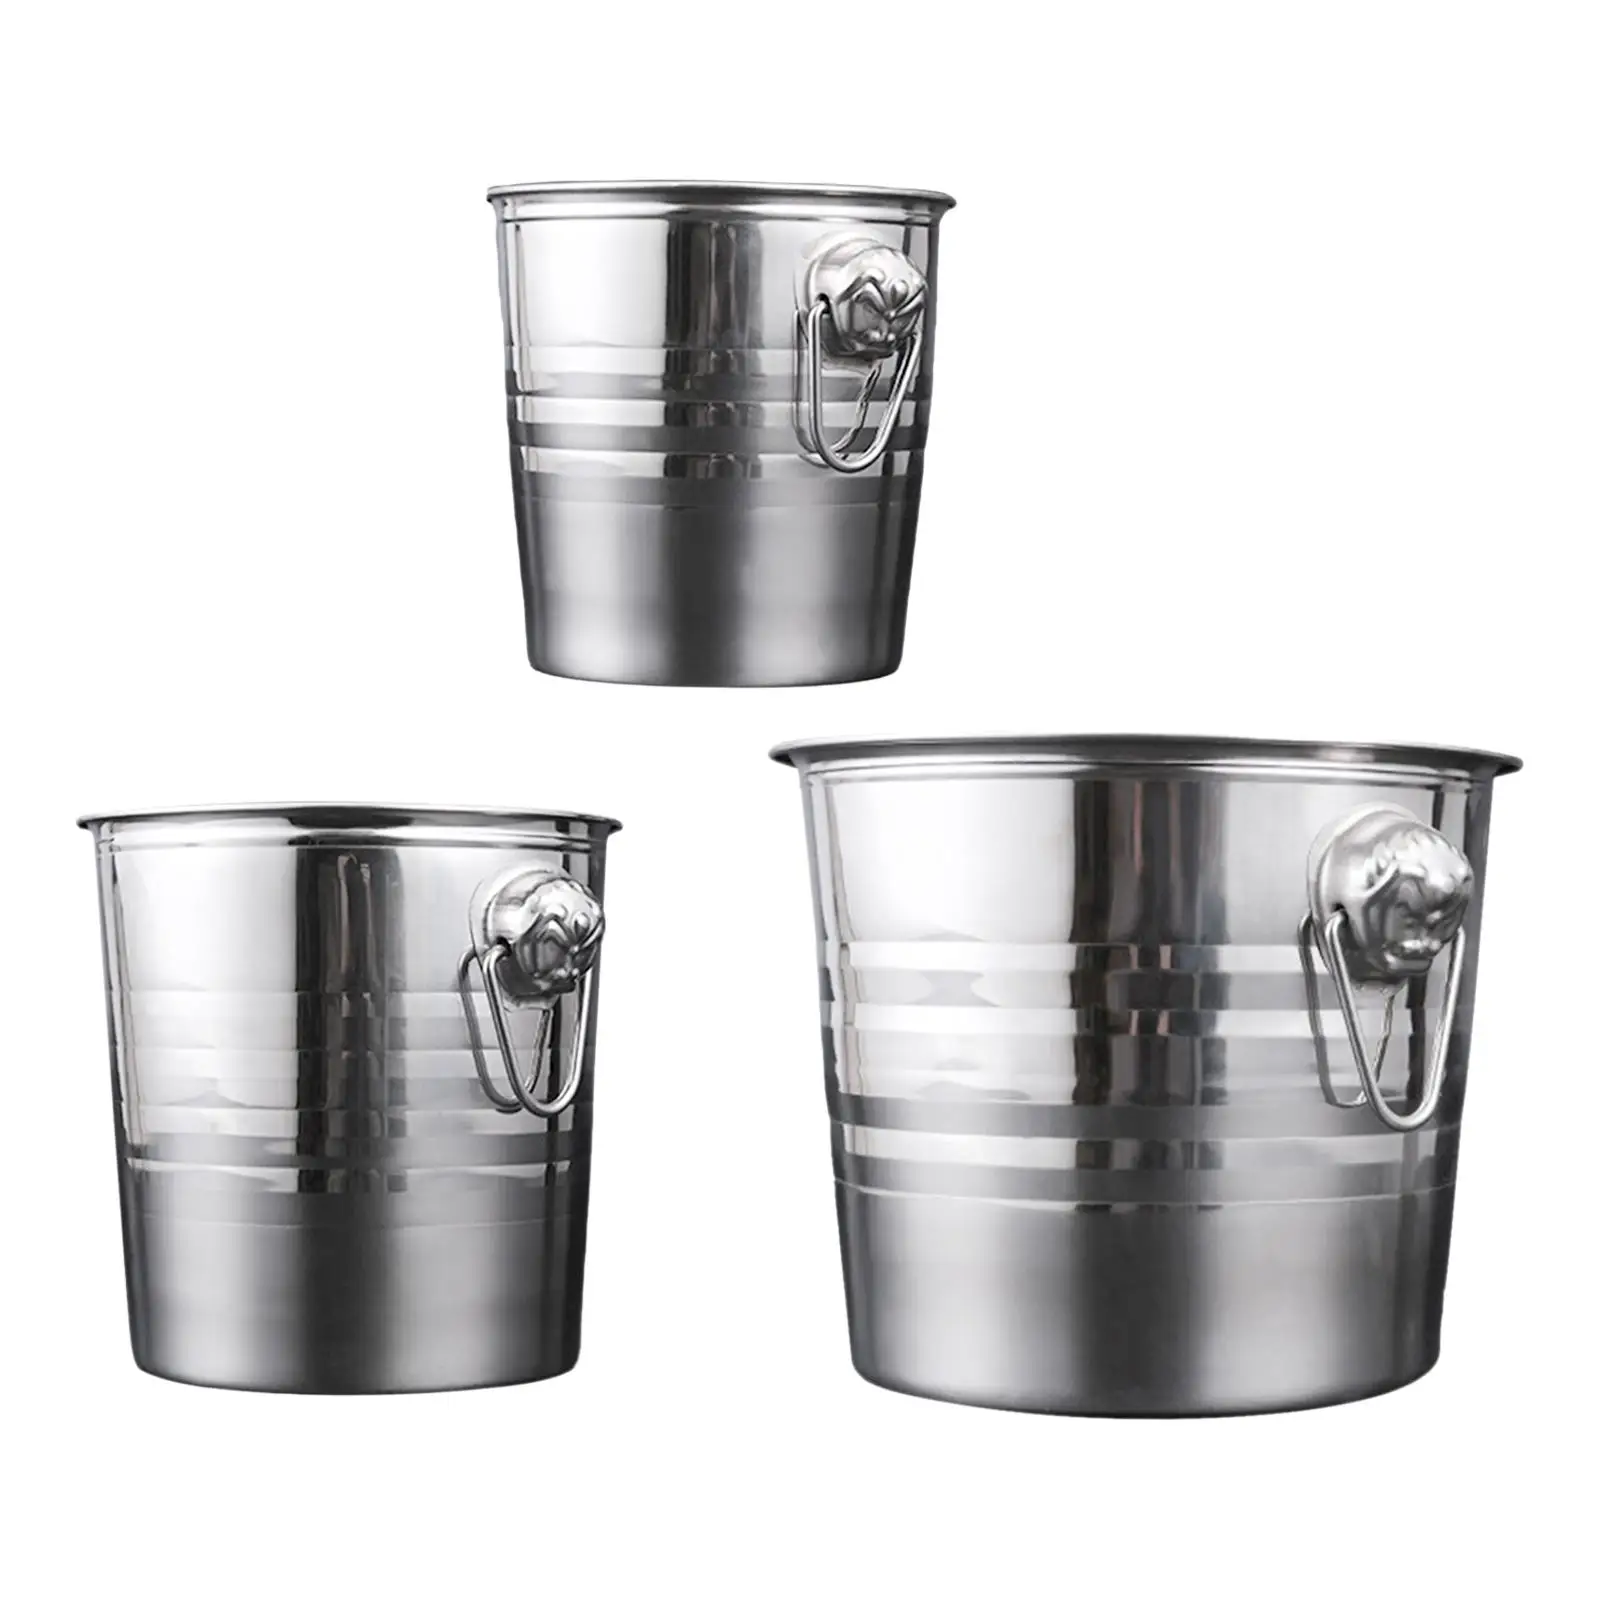 Ice Bucket Drink Tub 3L/5L/7L Double Walled Keeps Ice Cold with Insulation Drink Buckets for Champagne Cocktail Parties Home Bar